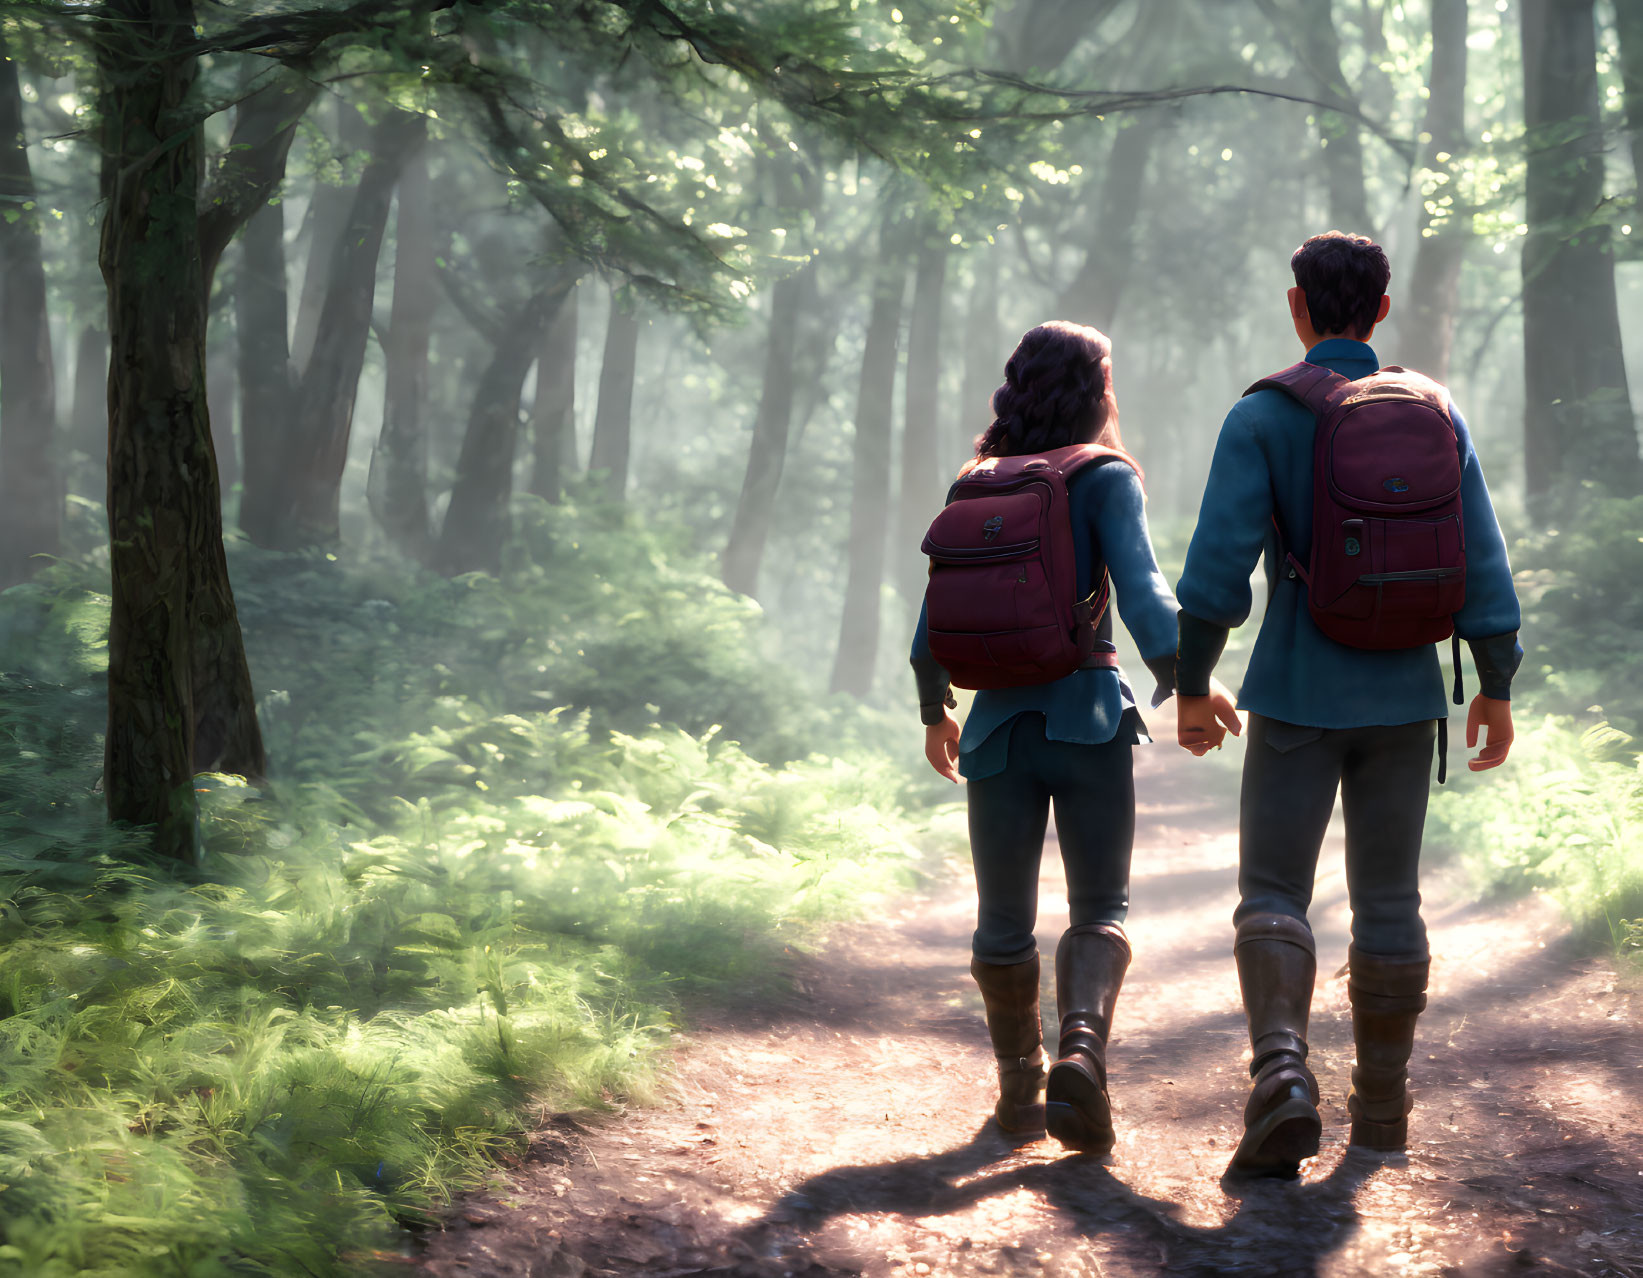 Couple walking in sunlit forest with backpacks and boots